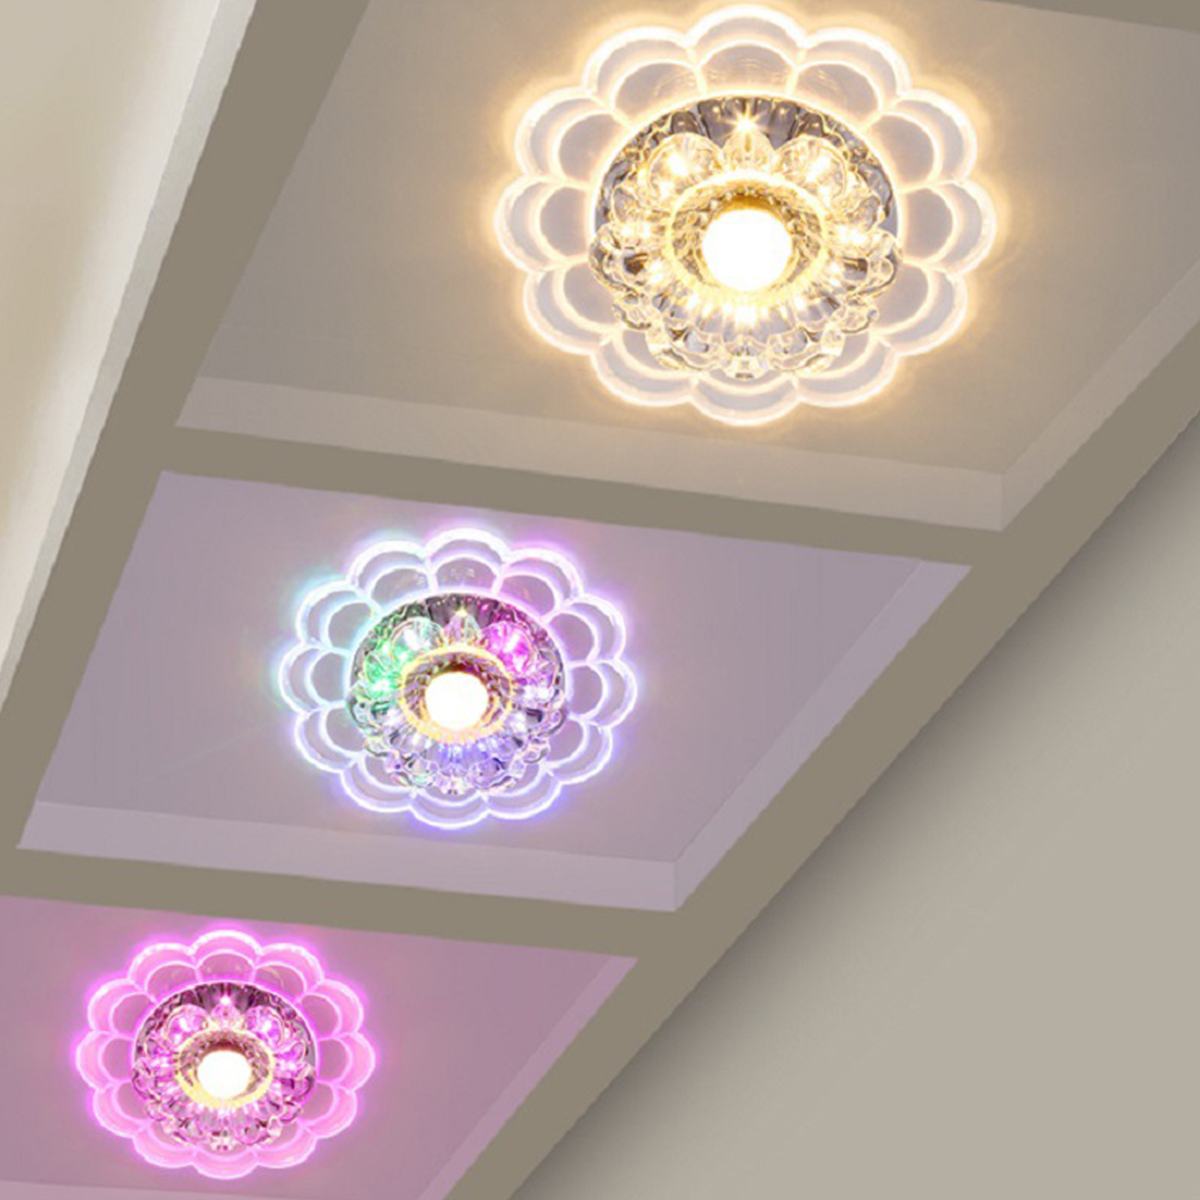 35W-79-LED-Crystal-Ceiling-Light-Ultra-Thin-Flush-Mount-Kitchen-Home-Fixture-1697198-9